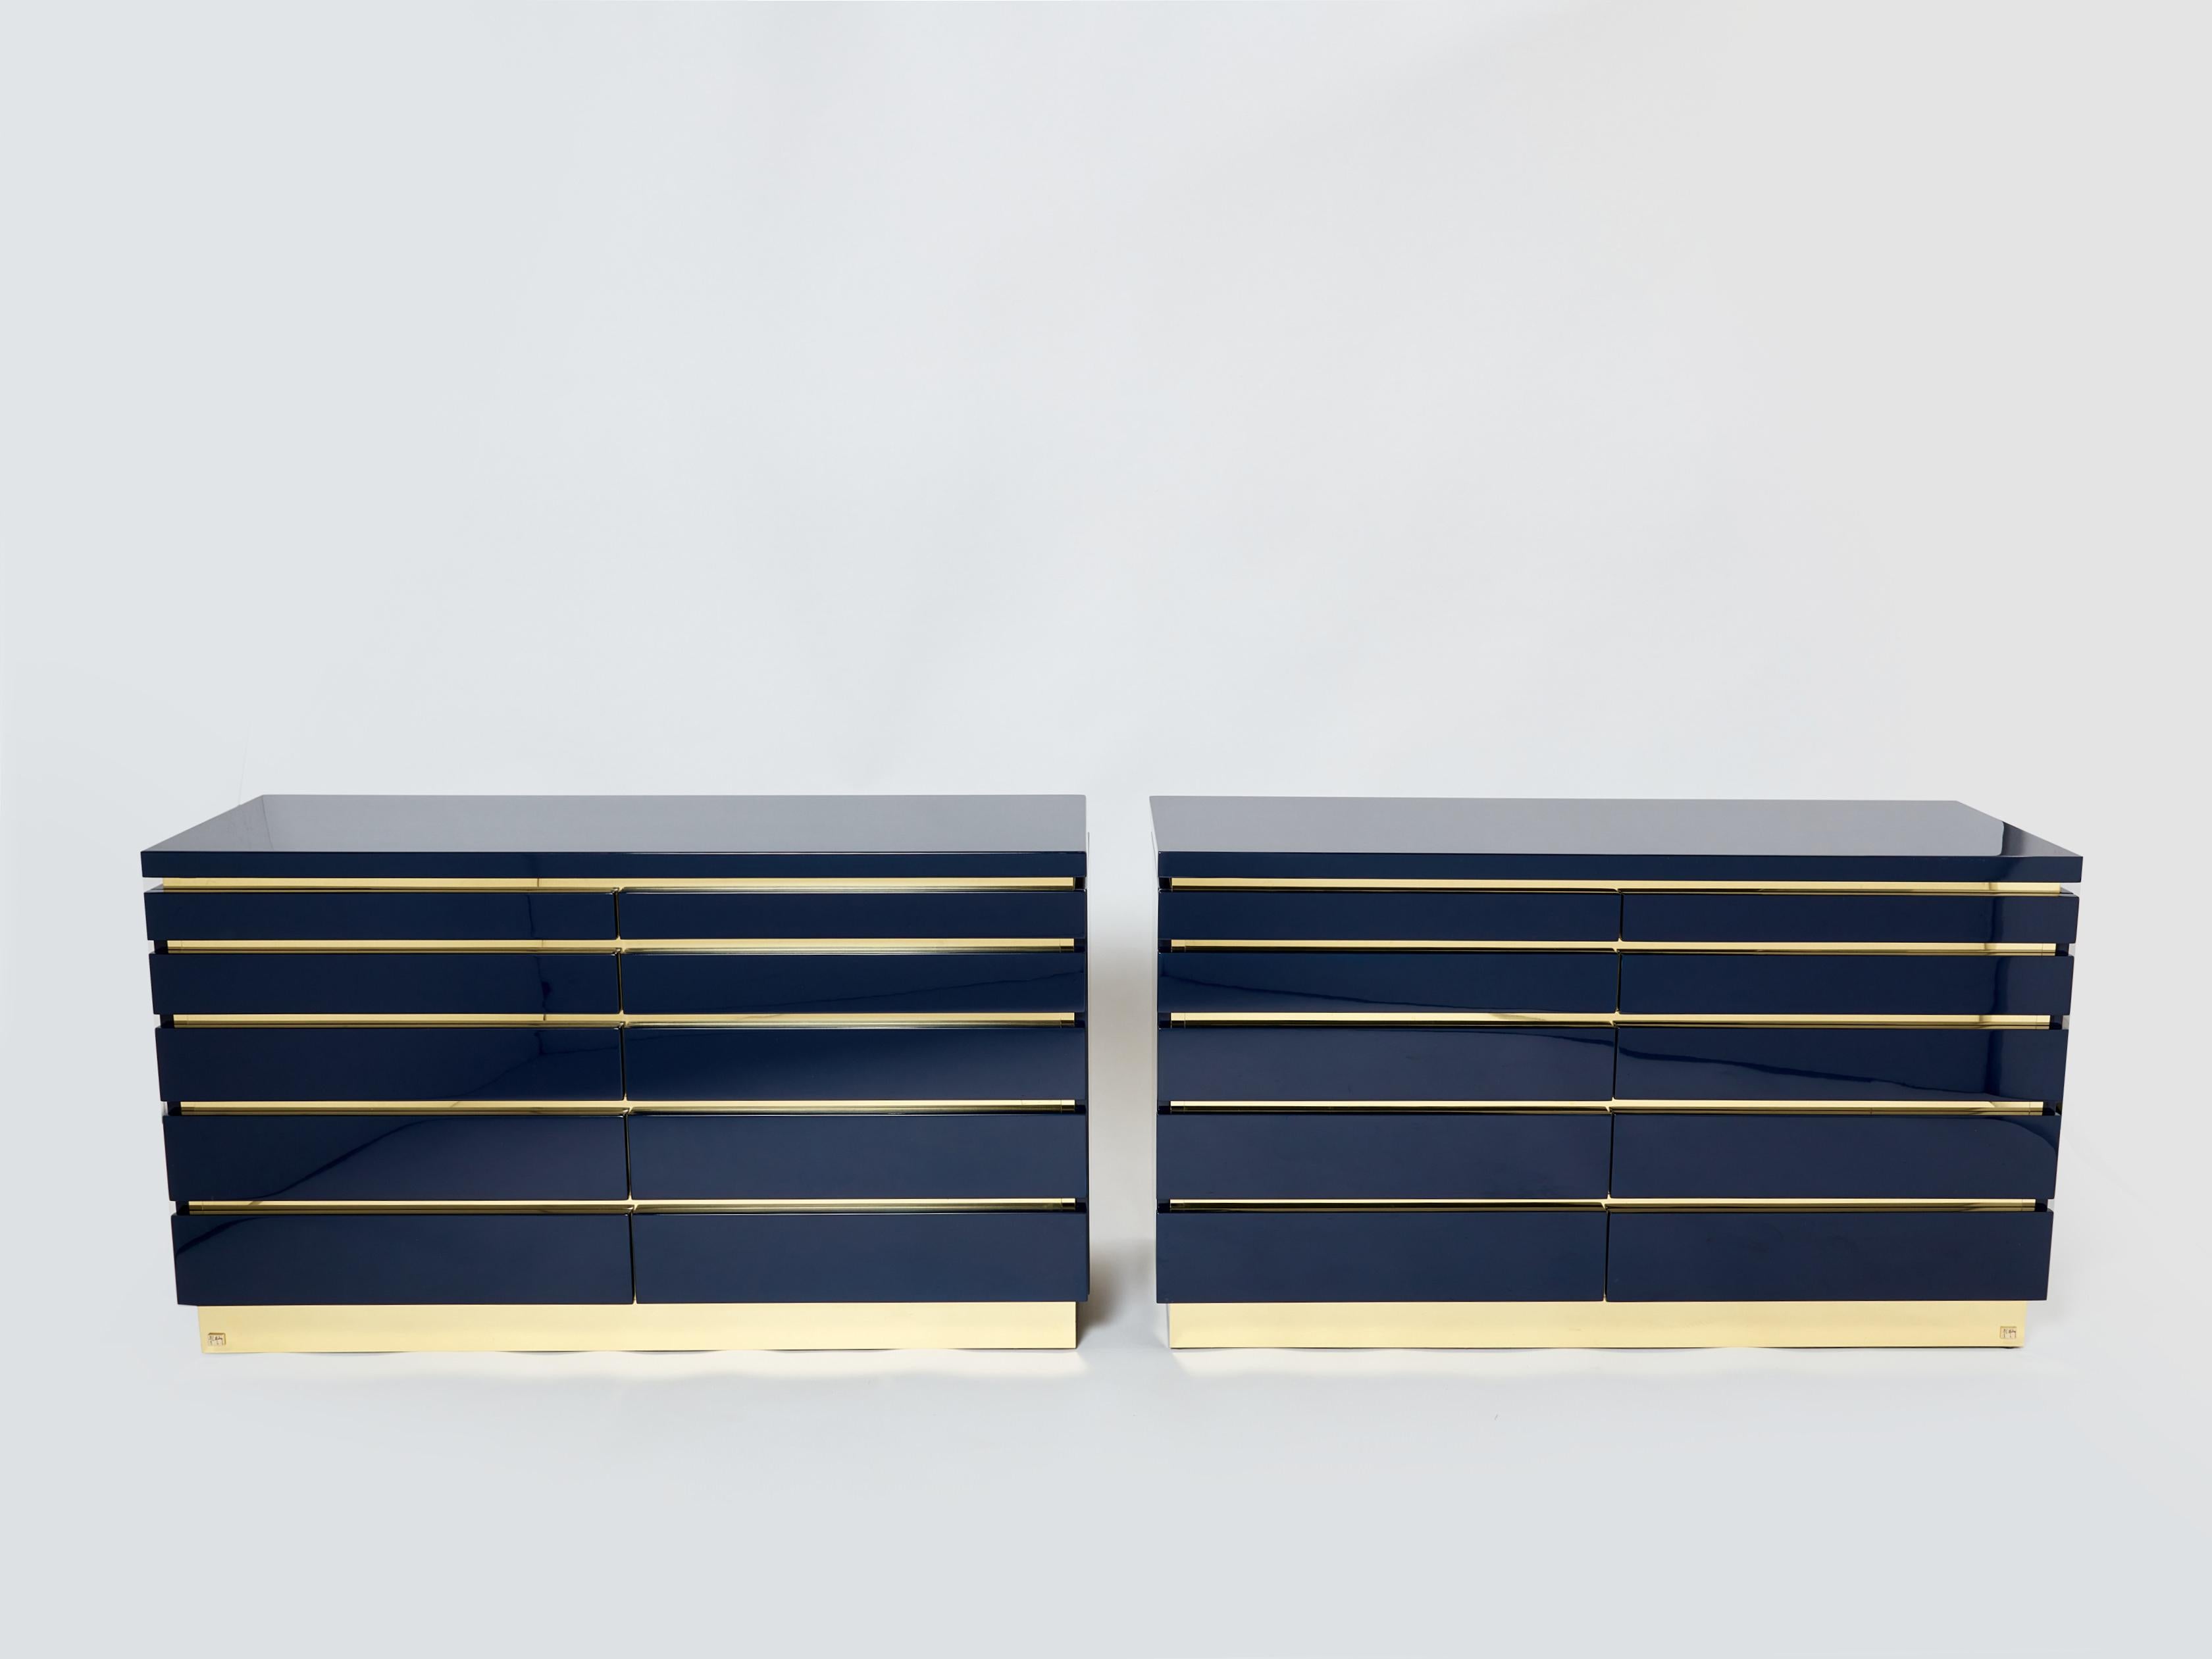 With a shining dark ocean blue lacquer finish, and brass standing and details between the ten drawers, this beautiful pair of chest of drawers carries a stellar French mid-century aesthetic into the contemporary home. Its boxy yet sophisticated